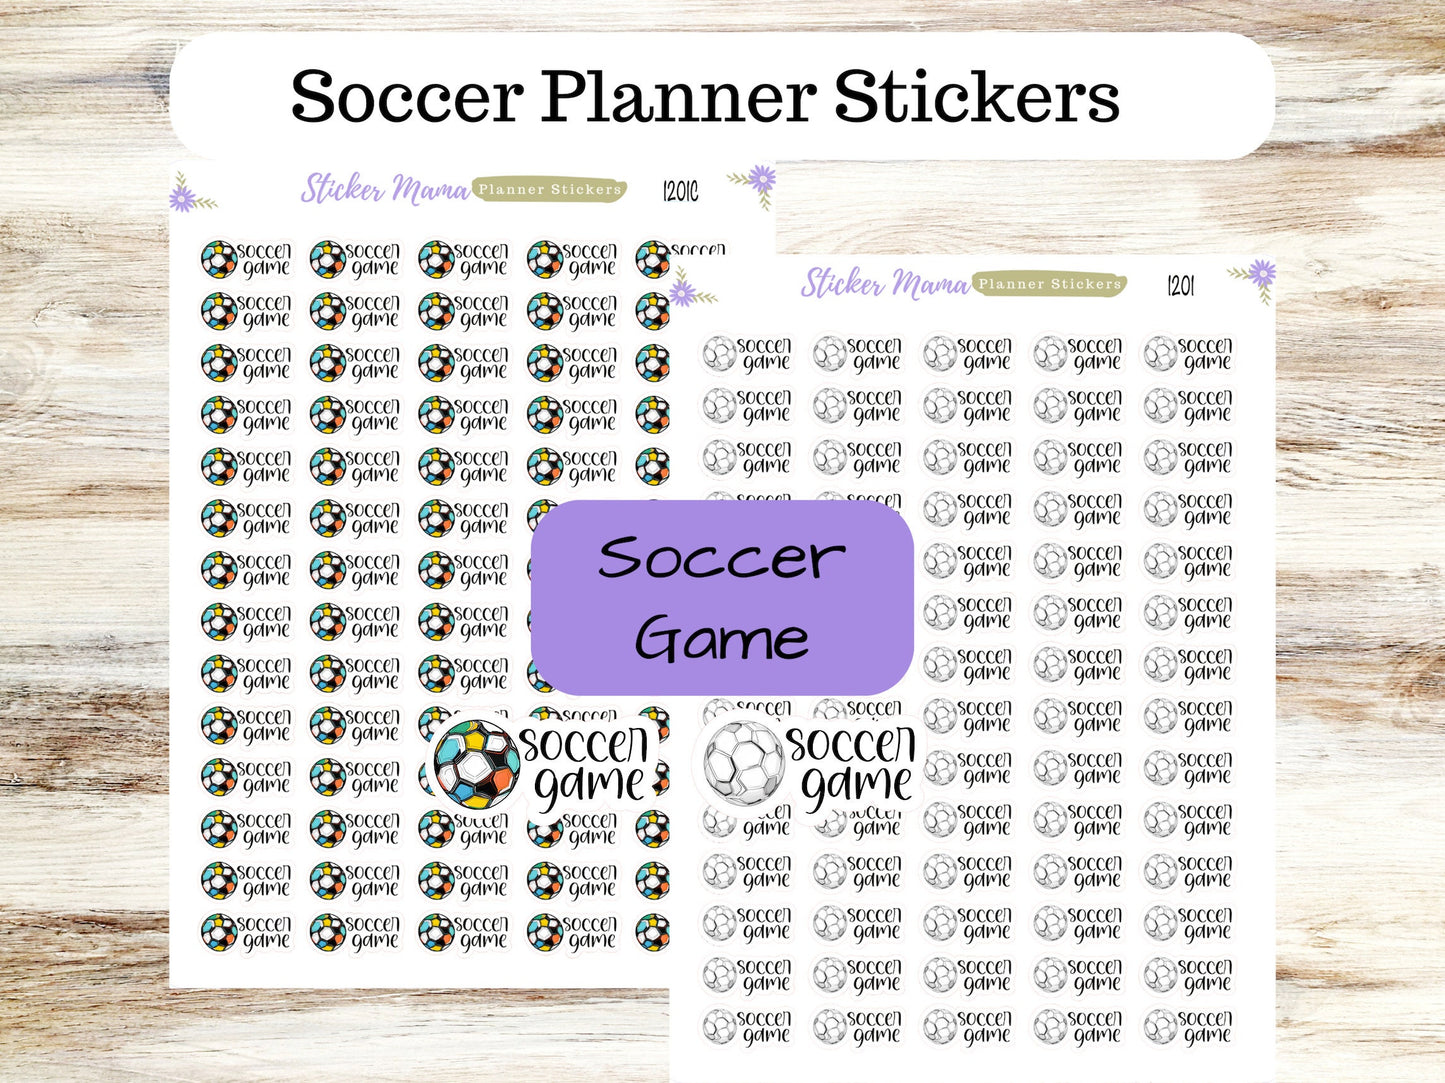 1201 SOCCER GAME STICKERS || Soccer Planner Stickers || Soccer Sports Stickers || Soccer Games || Soccer Practice